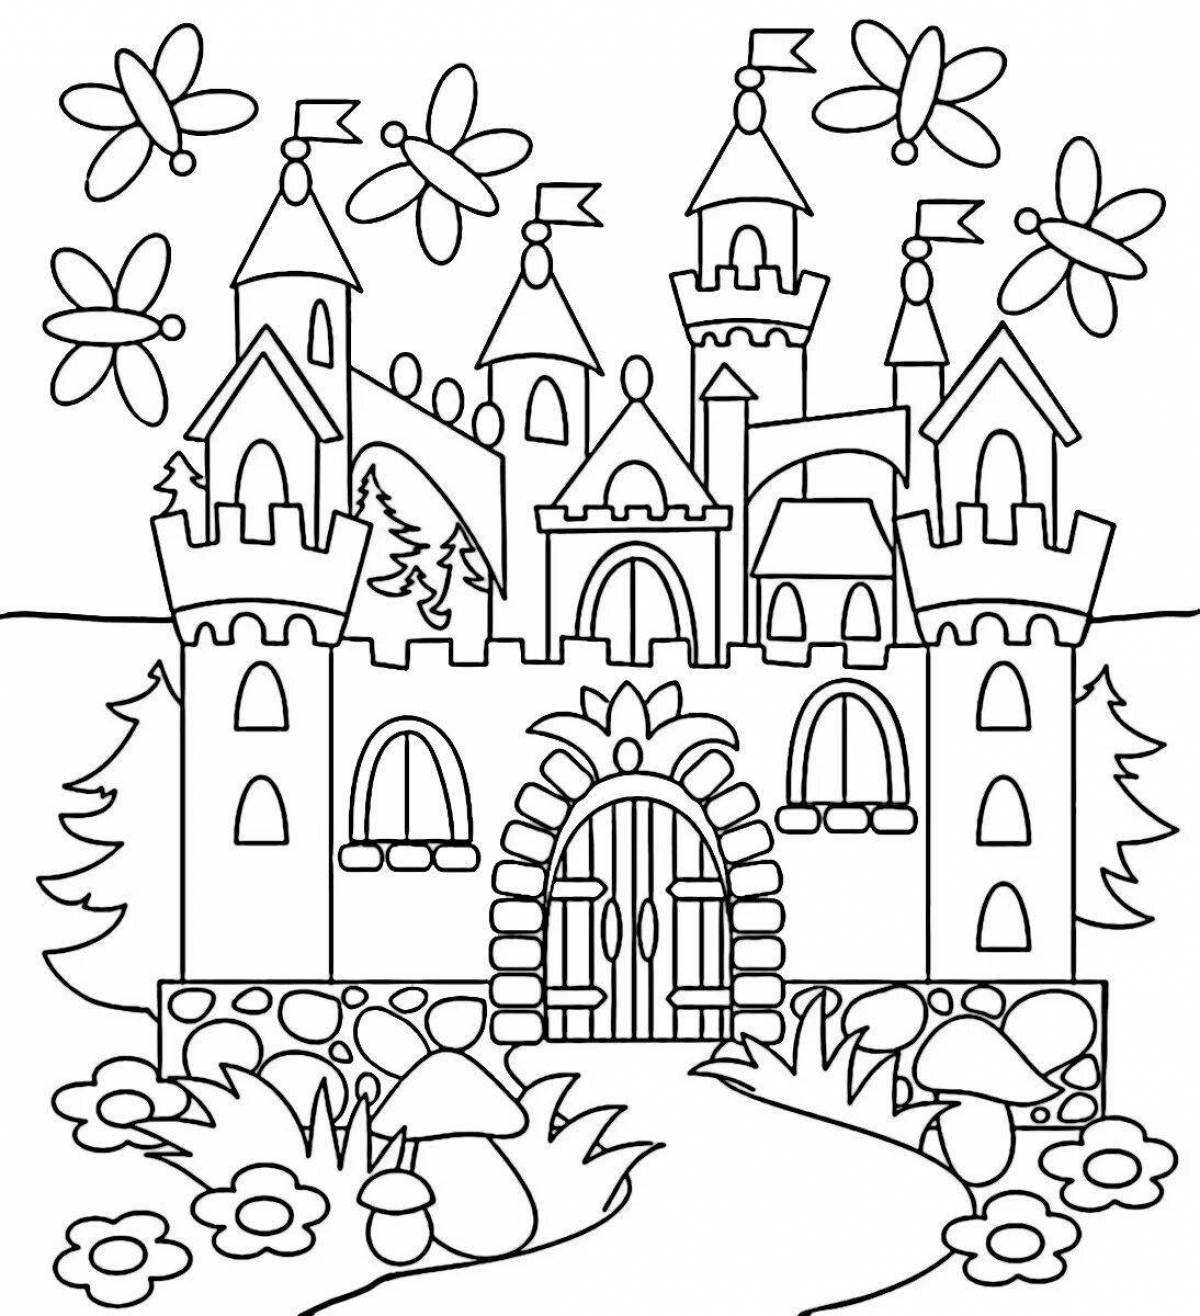 Big fairy kingdom coloring book for kids